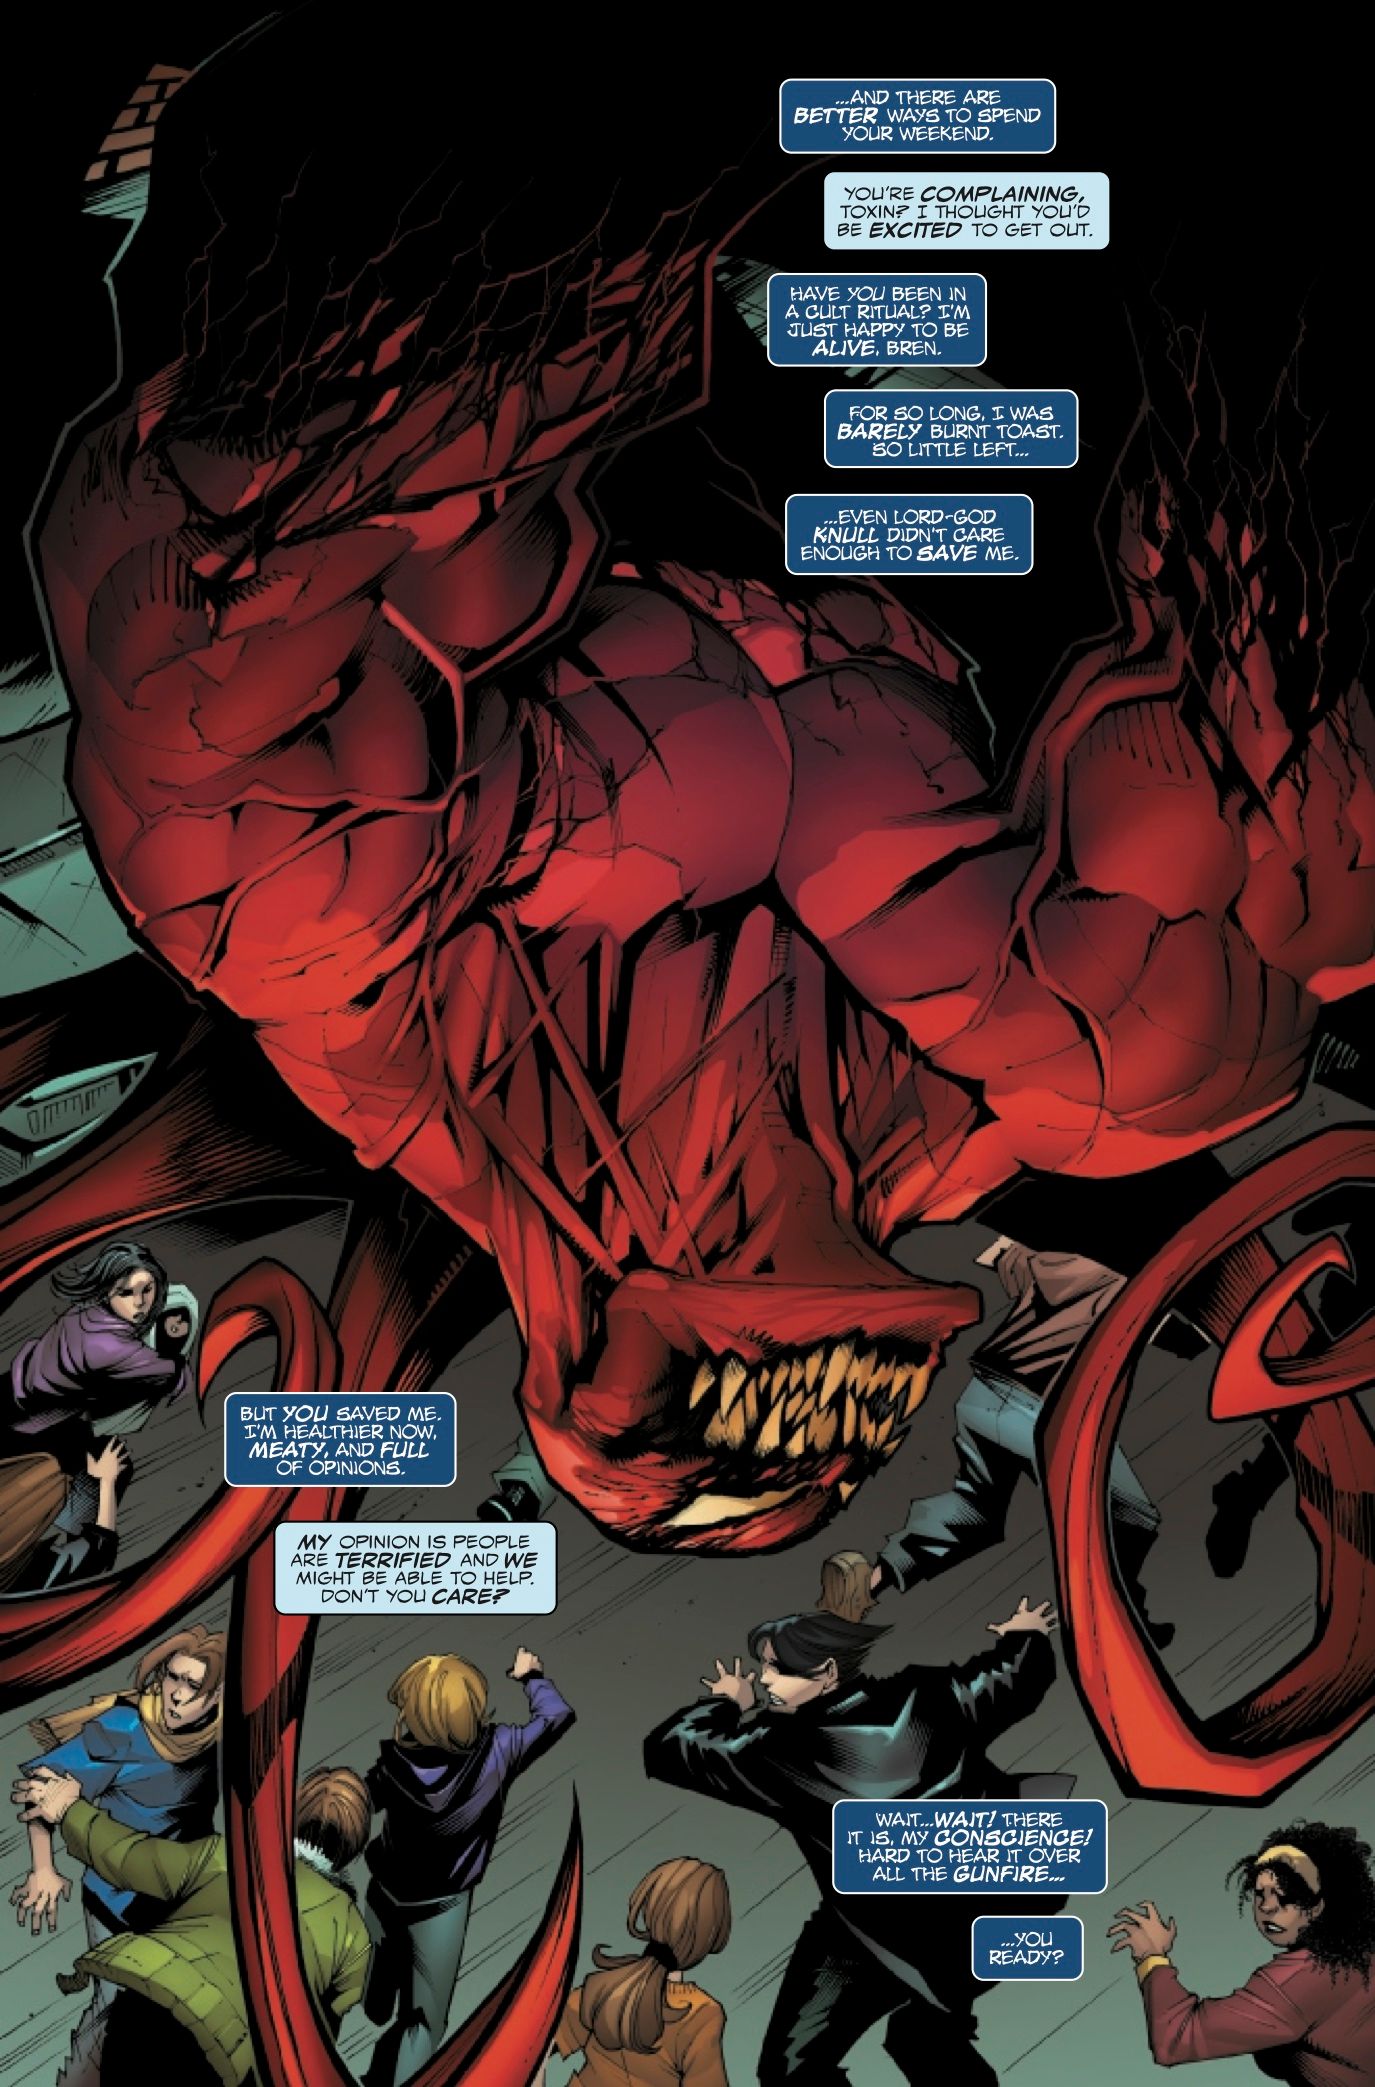 Planet-Symbiotes-3-Toxin-Preview-Page-2